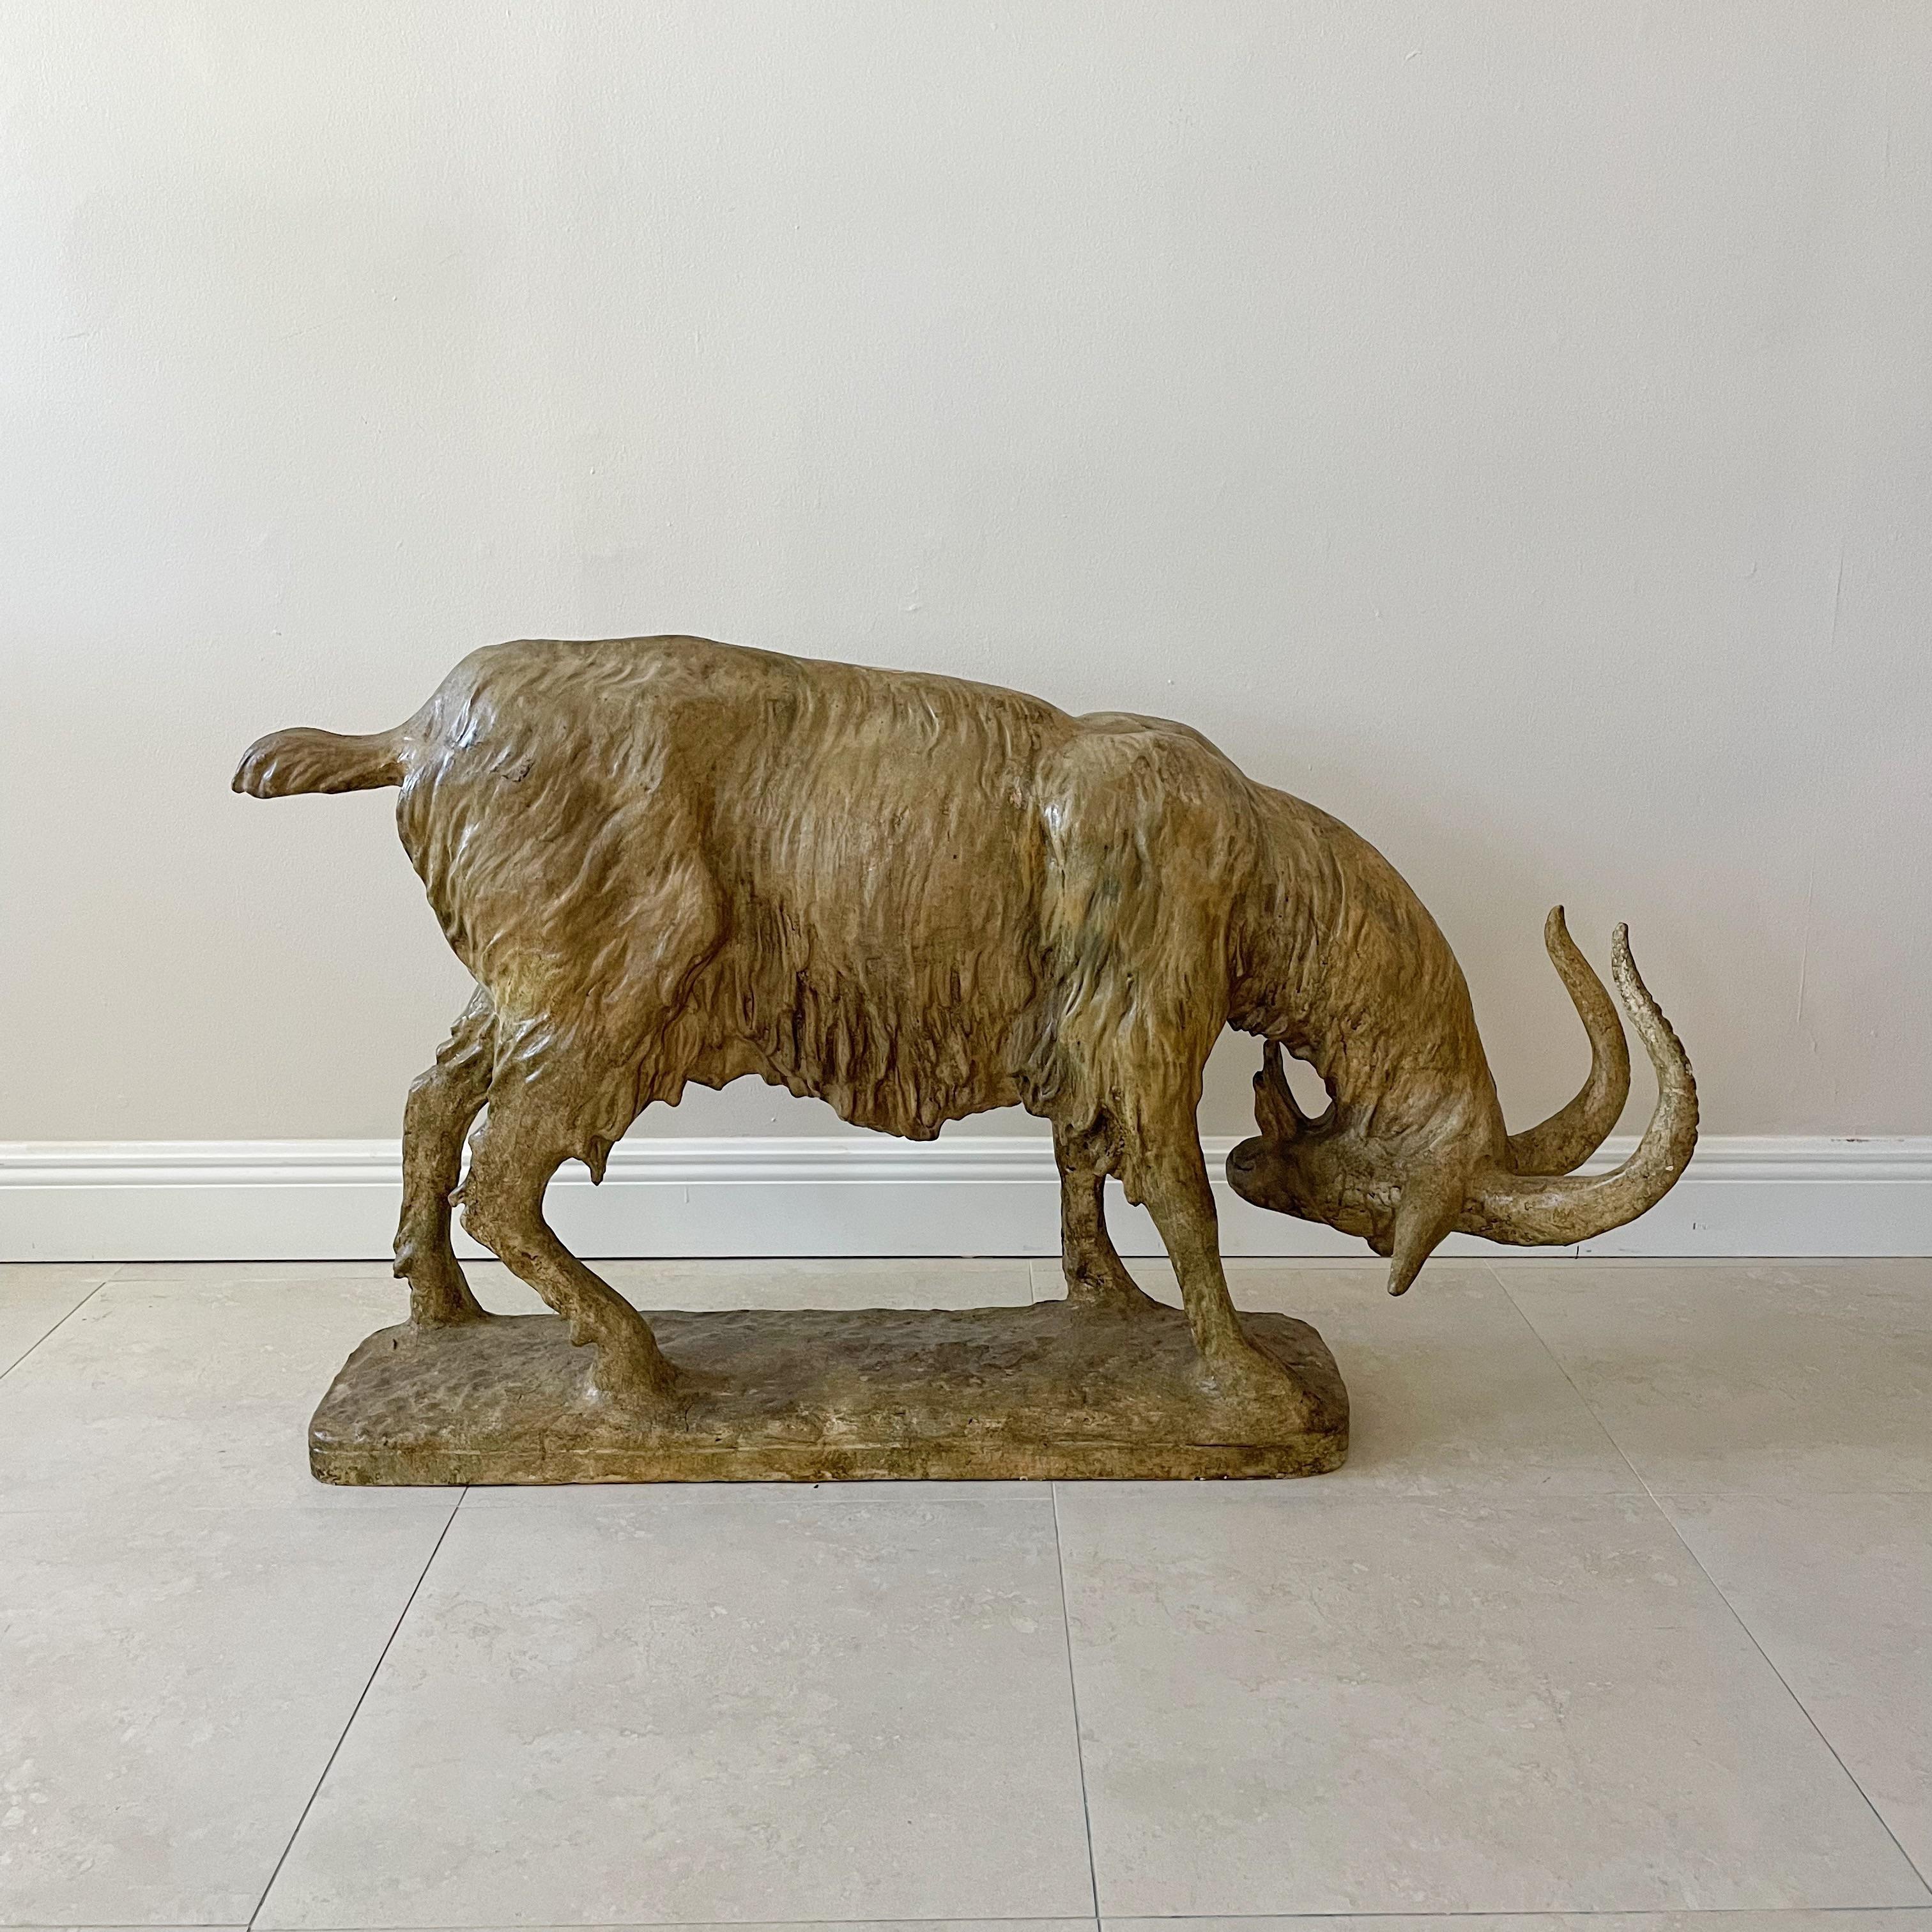 Realistic French Terracotta sculpture of a goat. Unsigned. Lifesize and fully restored to original finish. Structurally sound with no chips or breaks. Then base measures 36.5